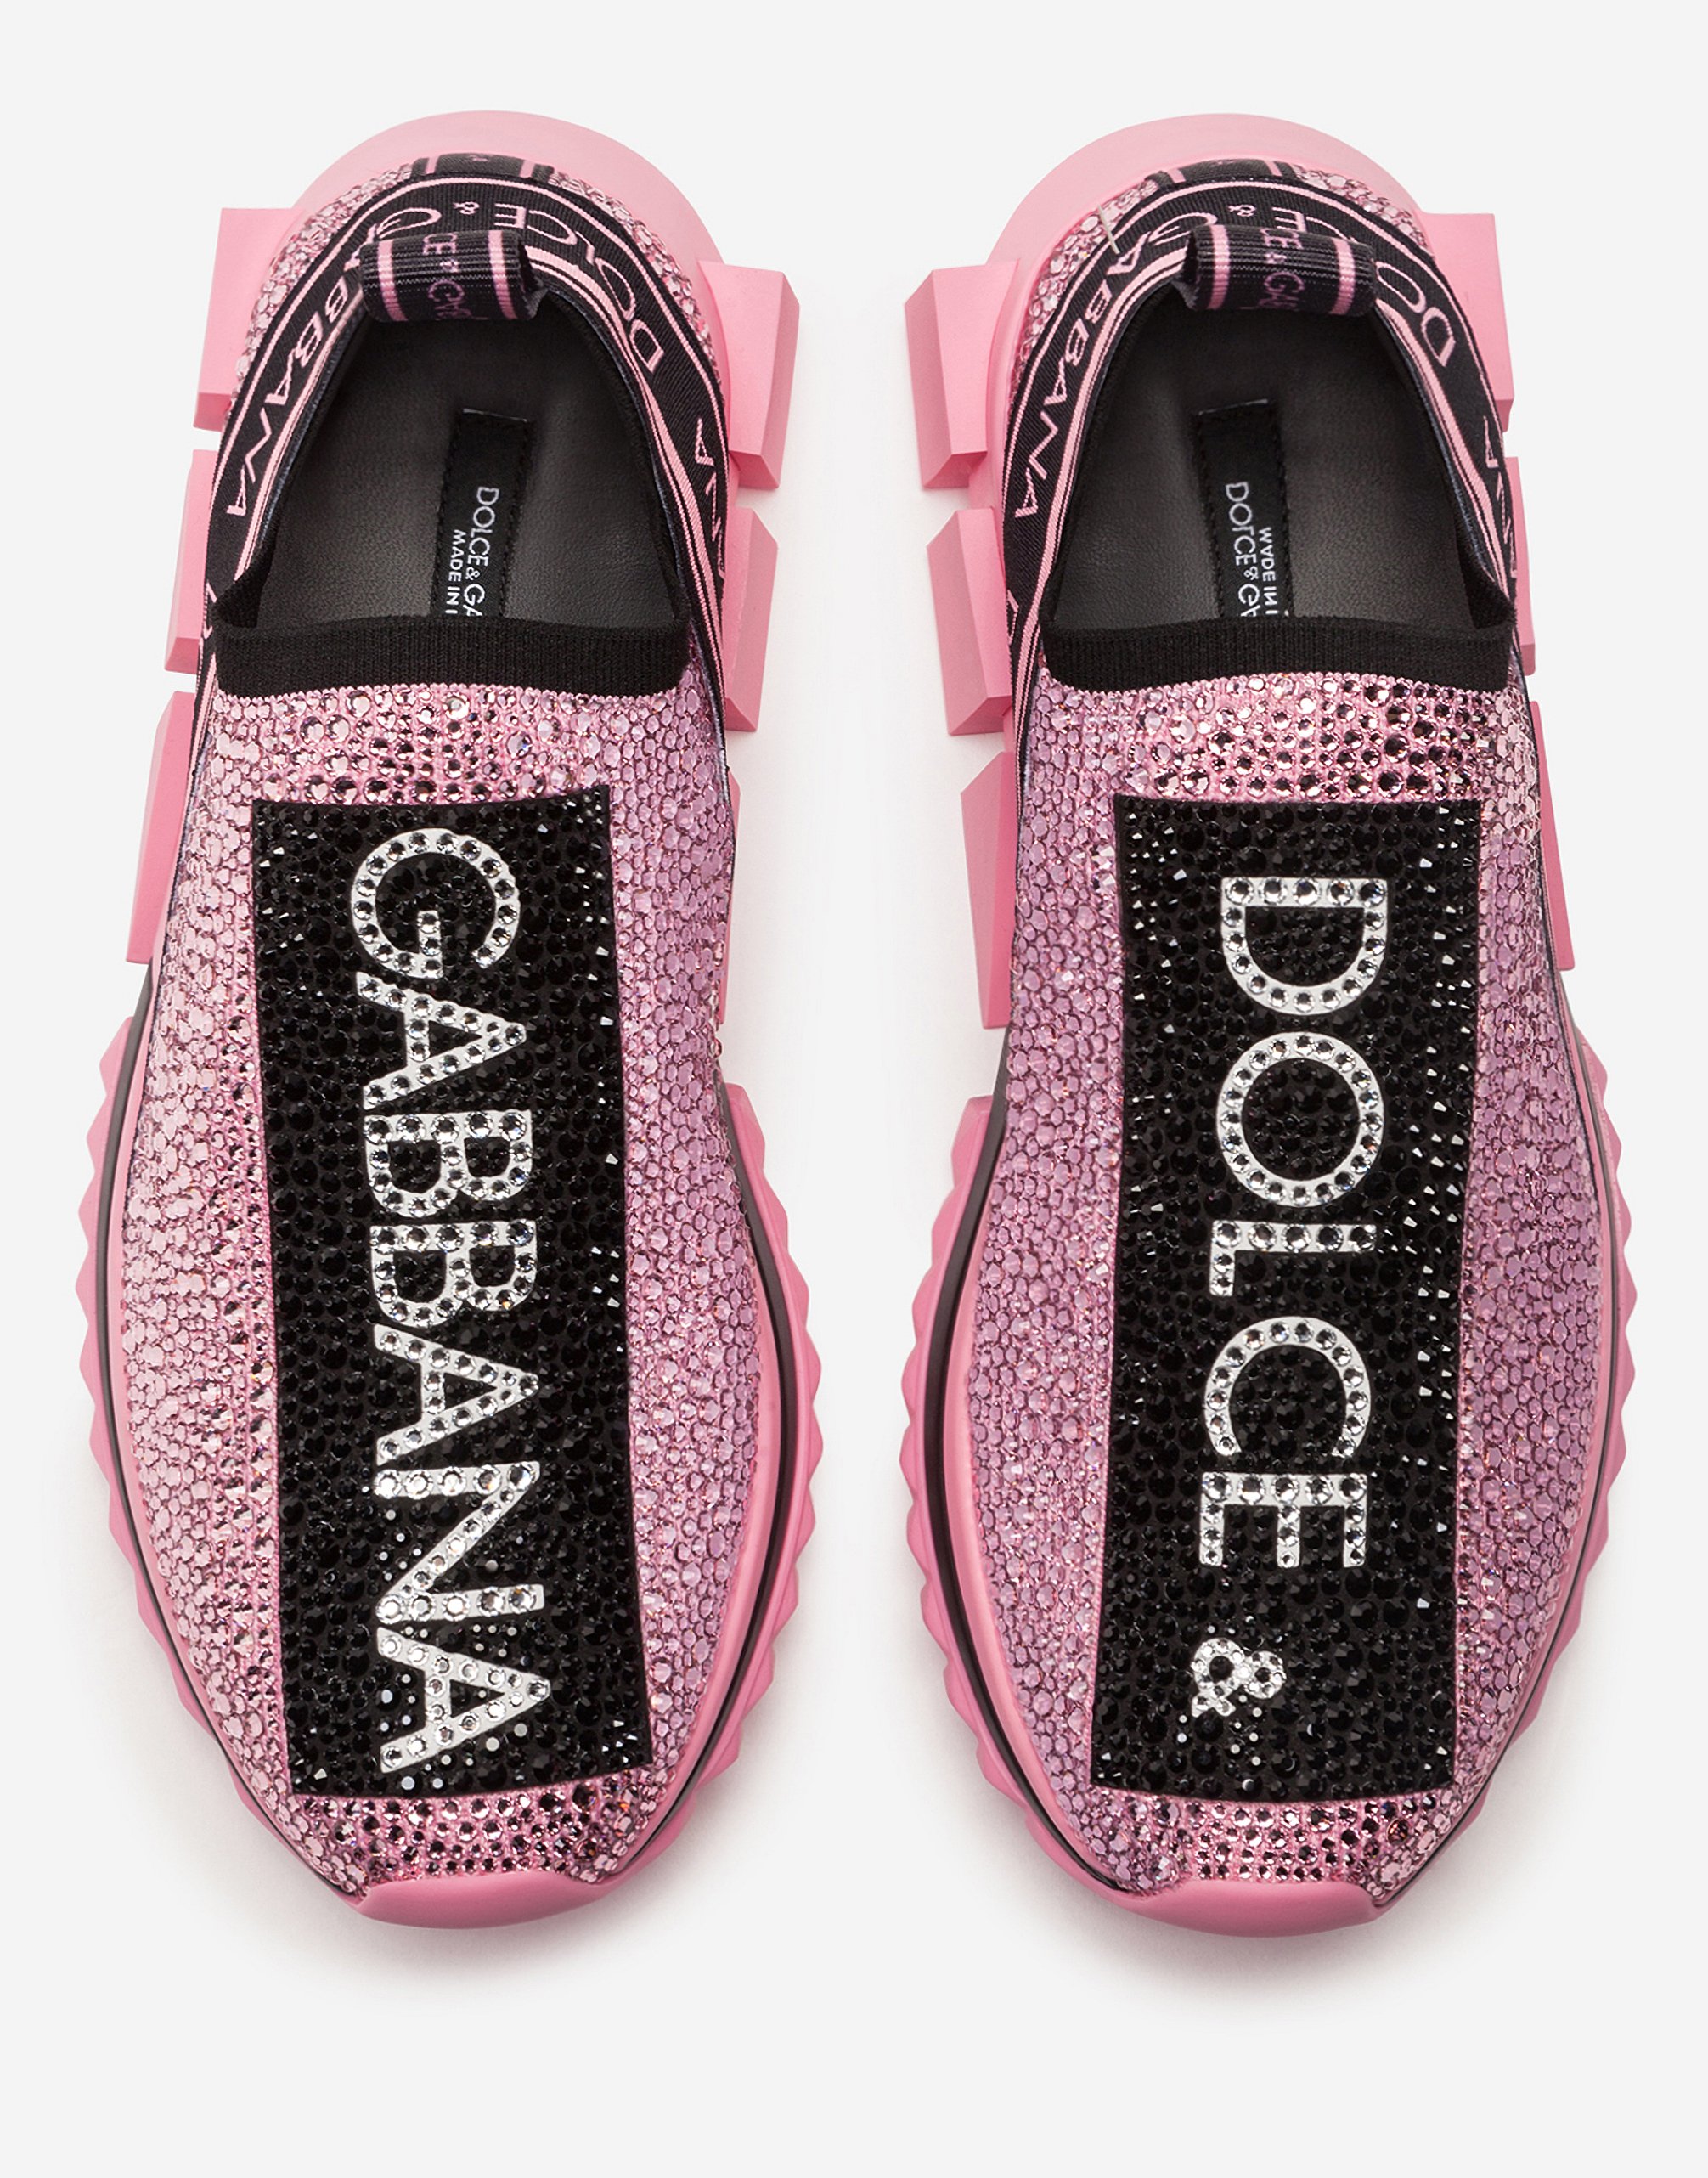 pink and black dolce and gabbana shoes